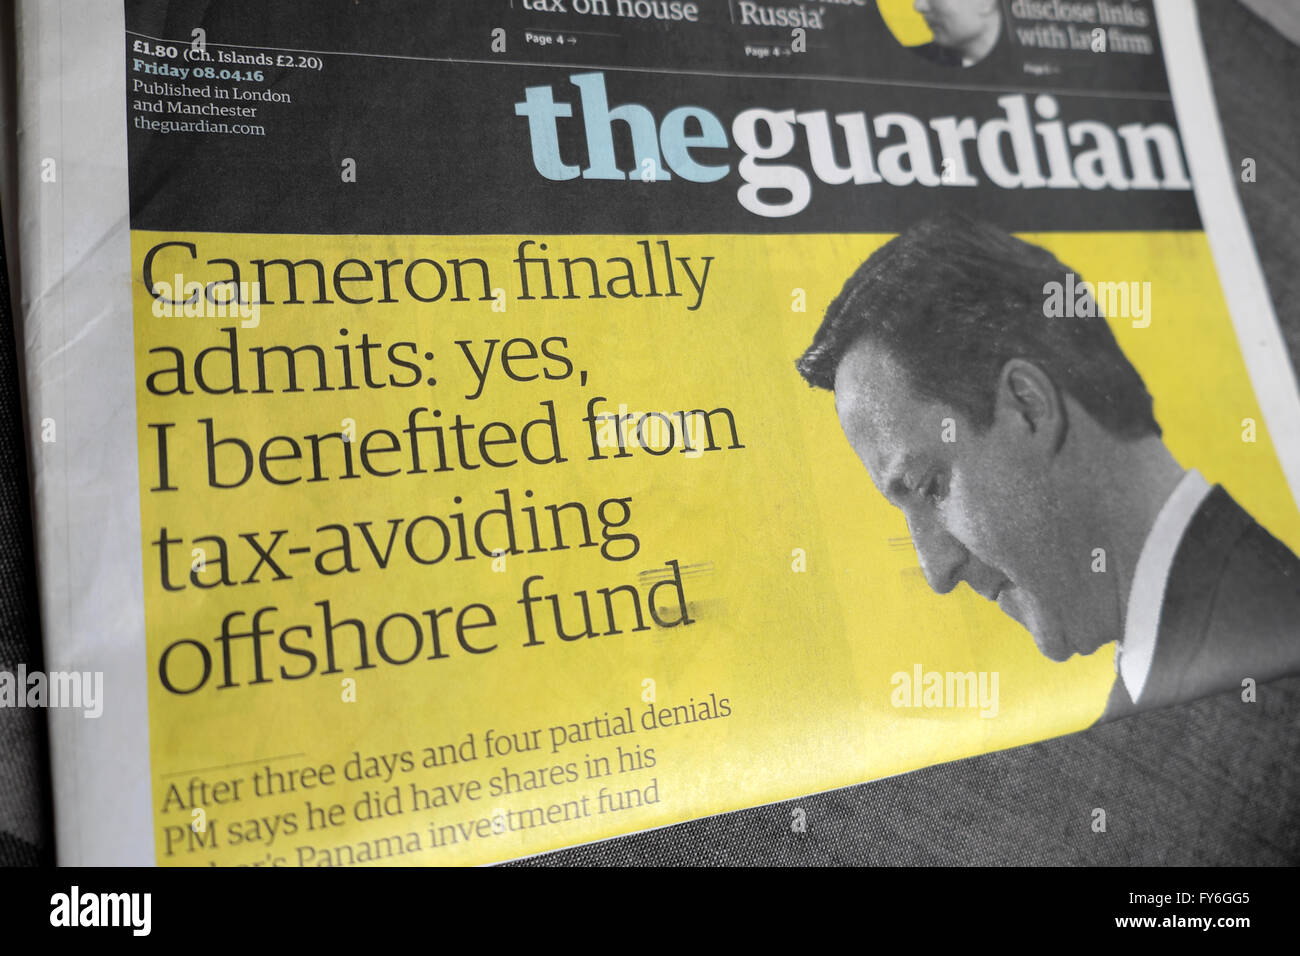 Guardian newspaper front page headline Panama Papers David Cameron admits Yes, I benefited from tax-avoiding offshore fund 2016 Stock Photo